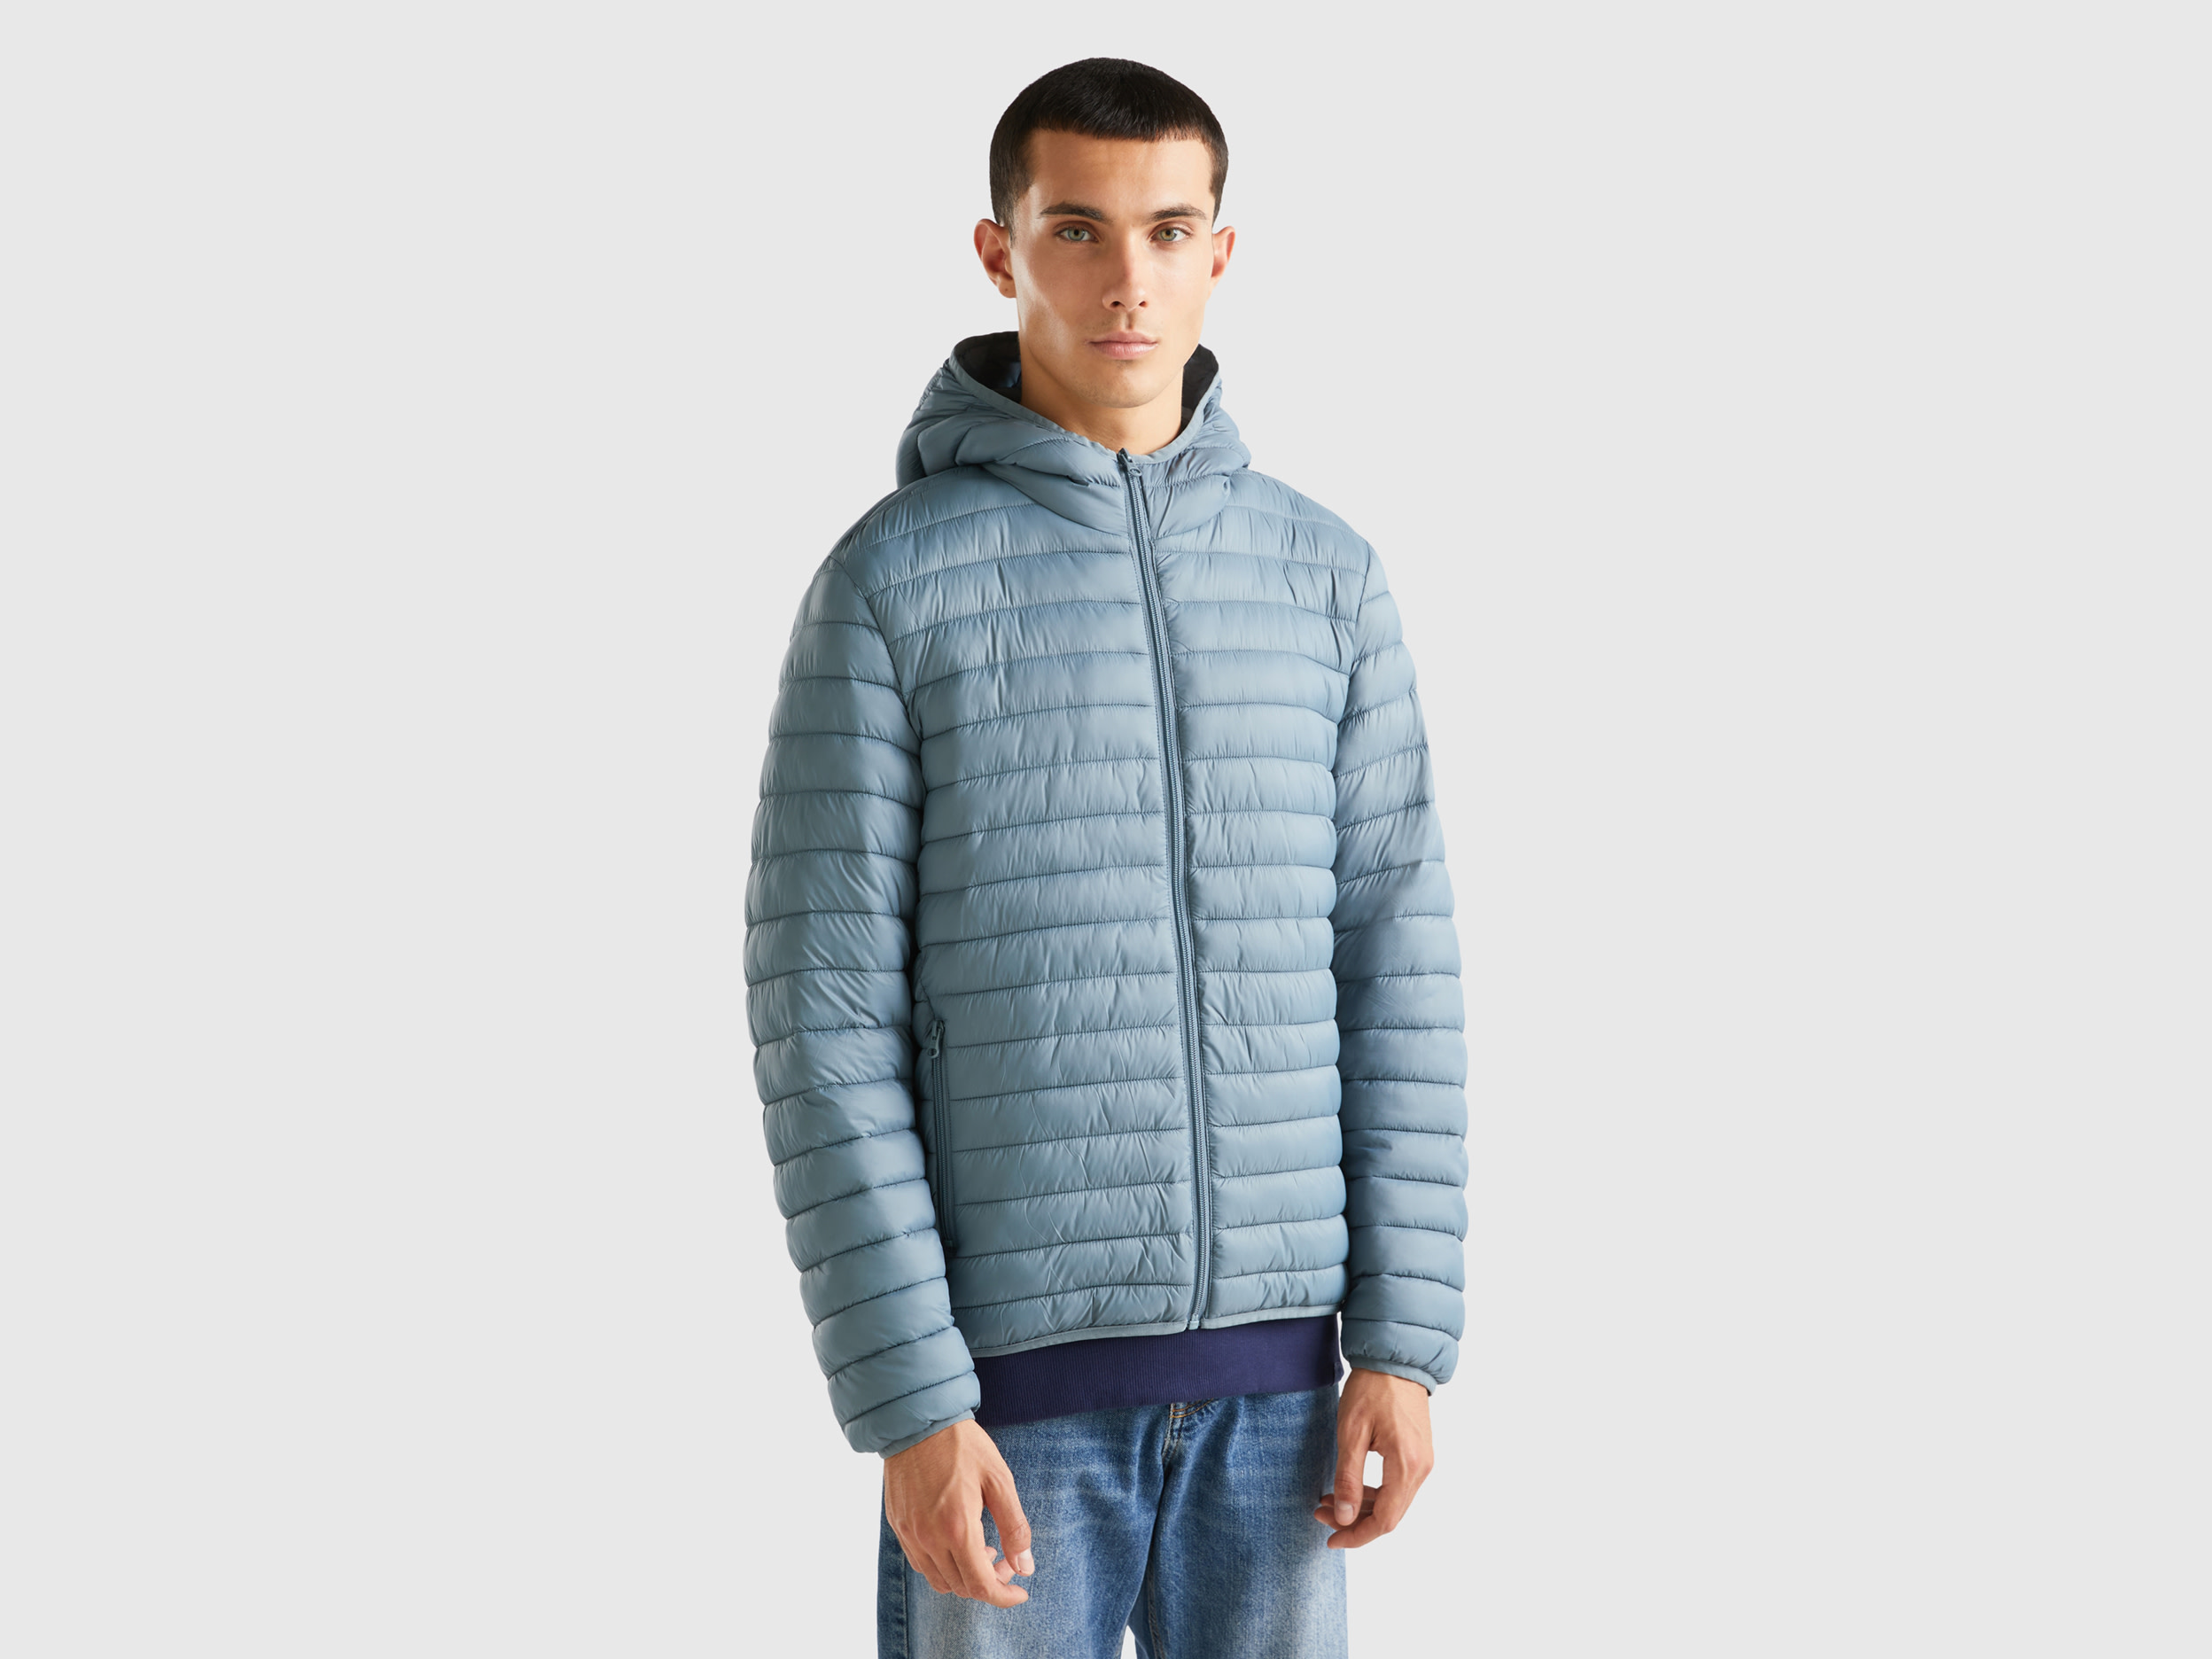 Benetton, Padded Jacket With Recycled Wadding, size M, Sky Blue, Men